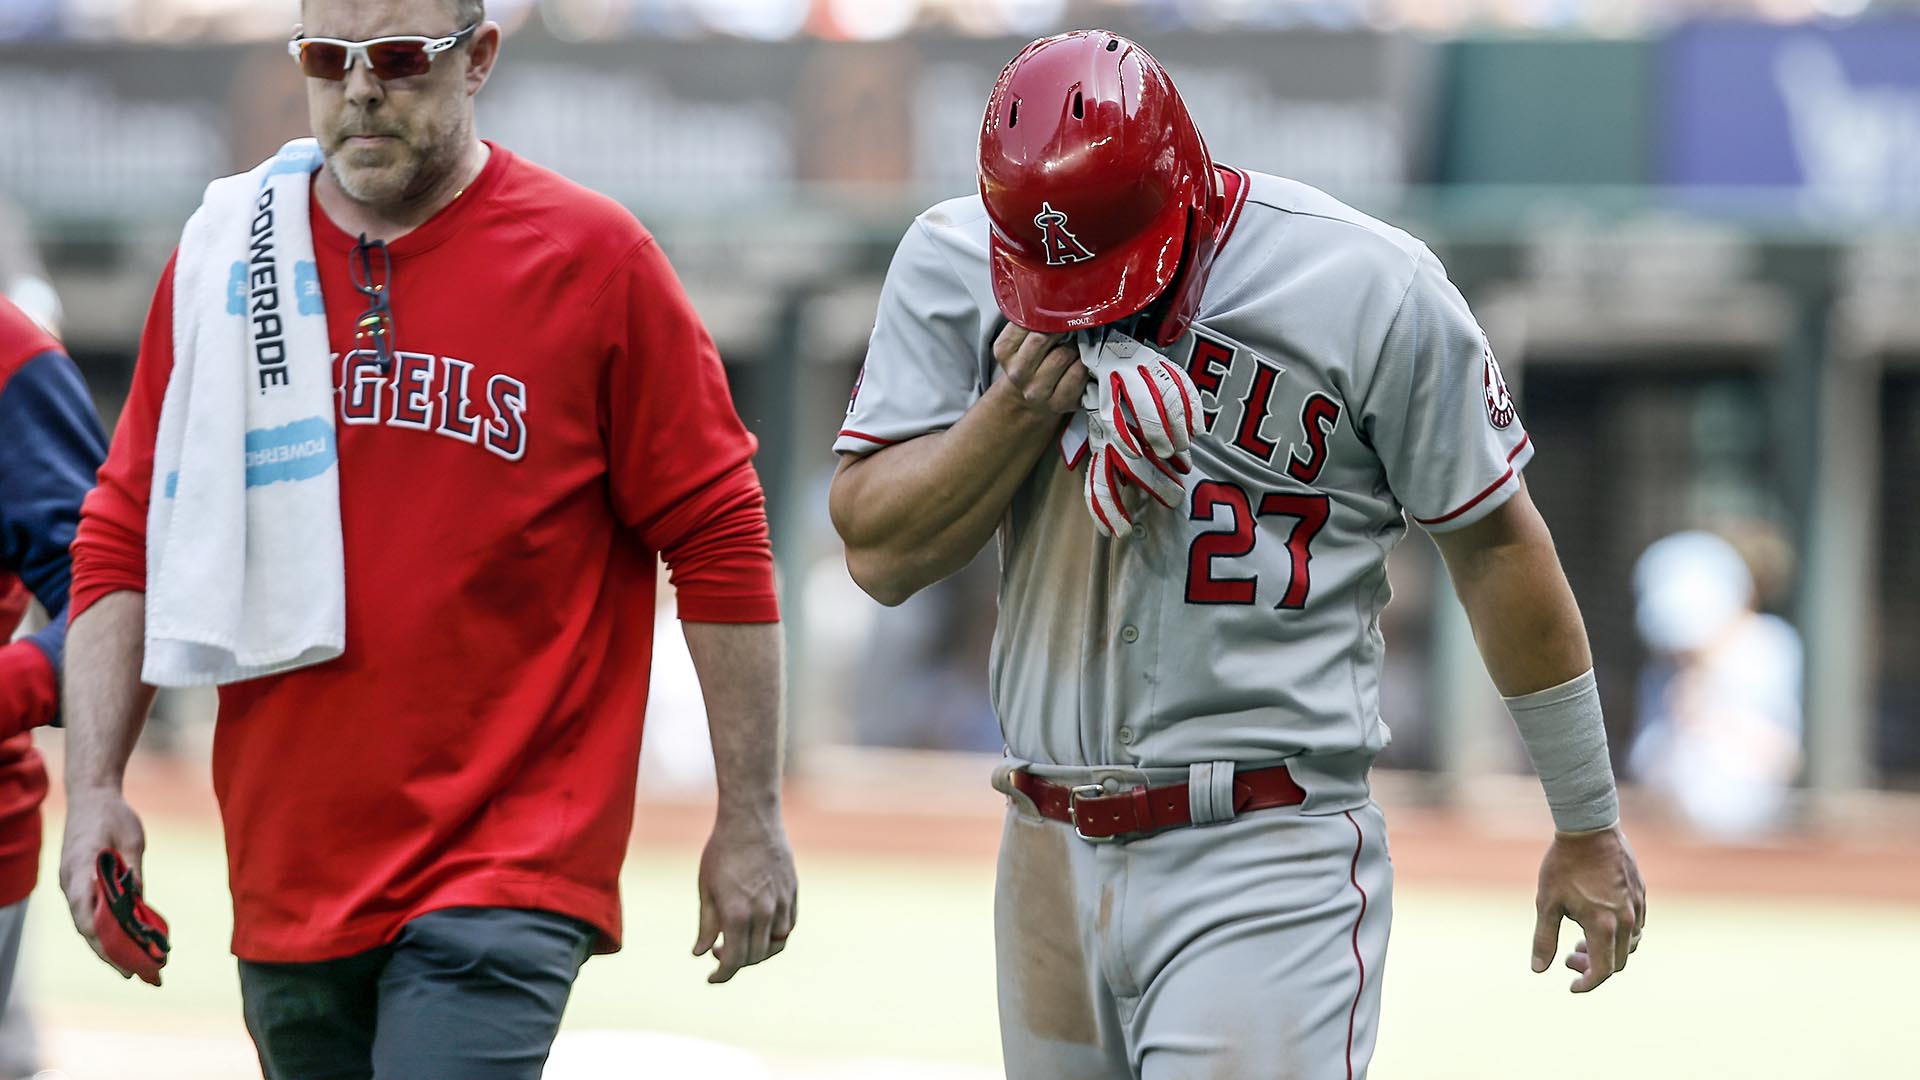 Mike Trout day to day after being hit in hand by pitch